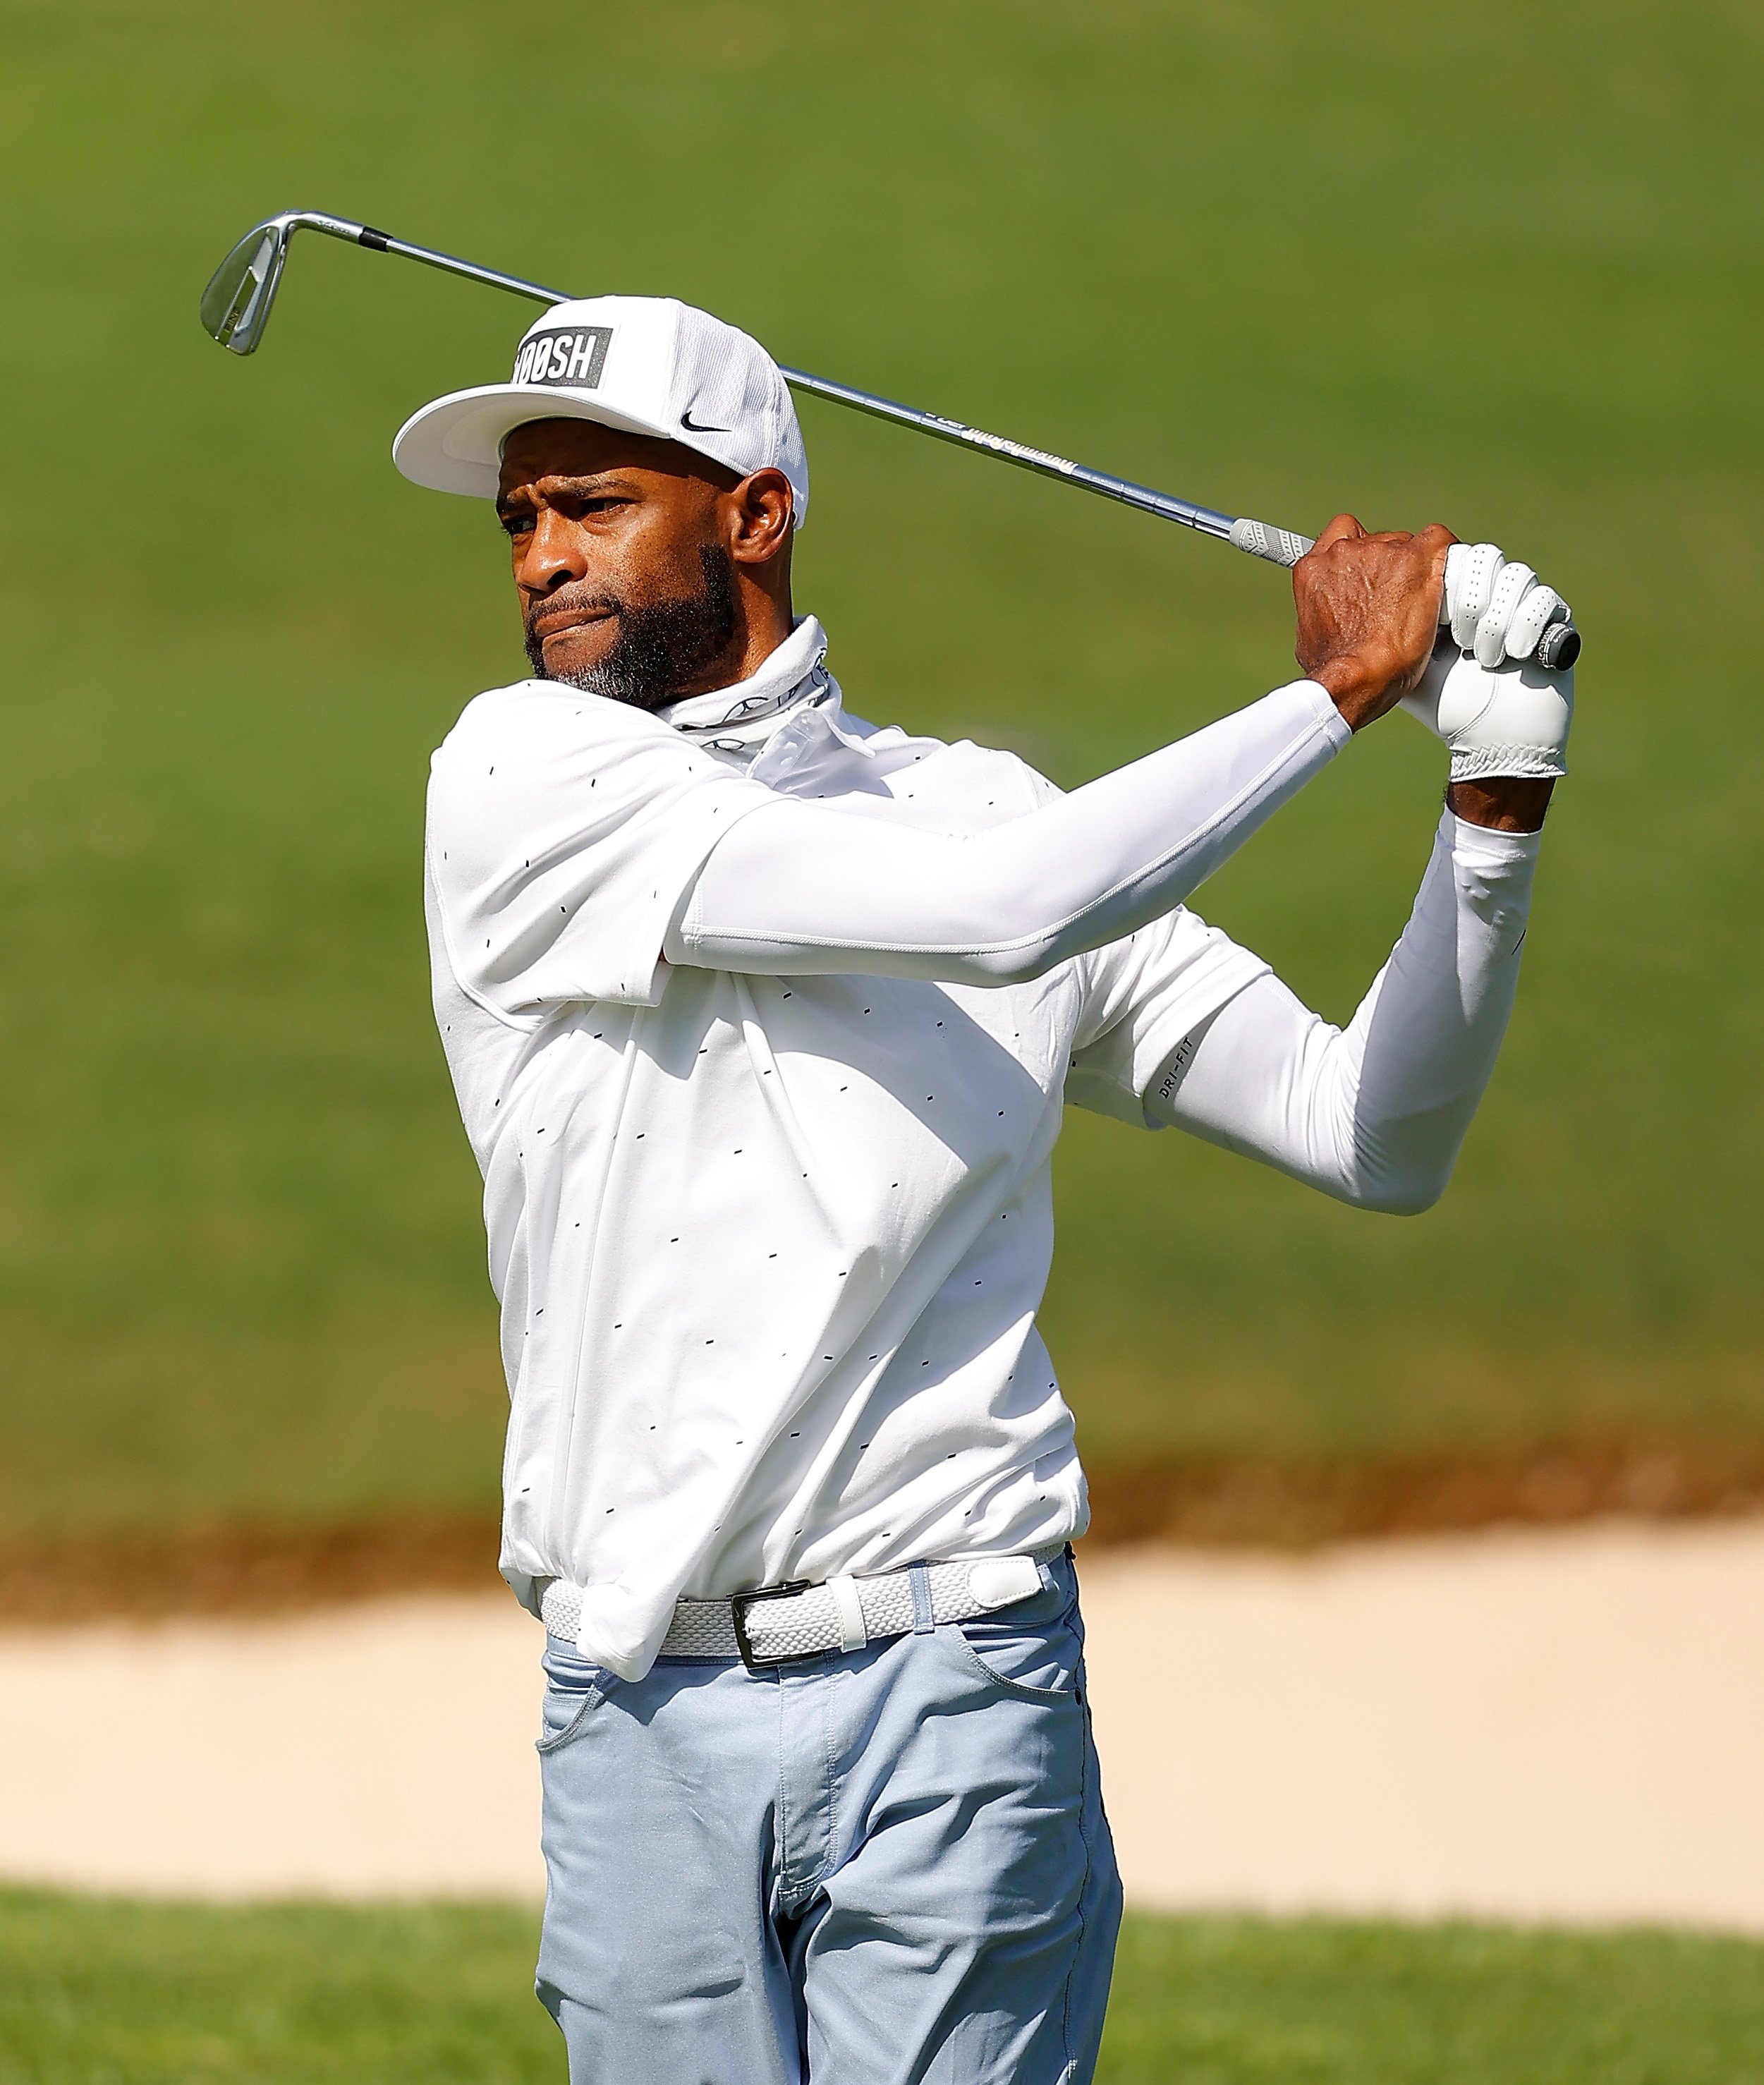 Newly retired NBA player Vince Carter plays a shot on the 16th hole during the "Golf With a Purpose" Charity Challenge at East Lake Golf Club on September 03, 2020 in Atlanta, Georgia. | Source: Getty Images